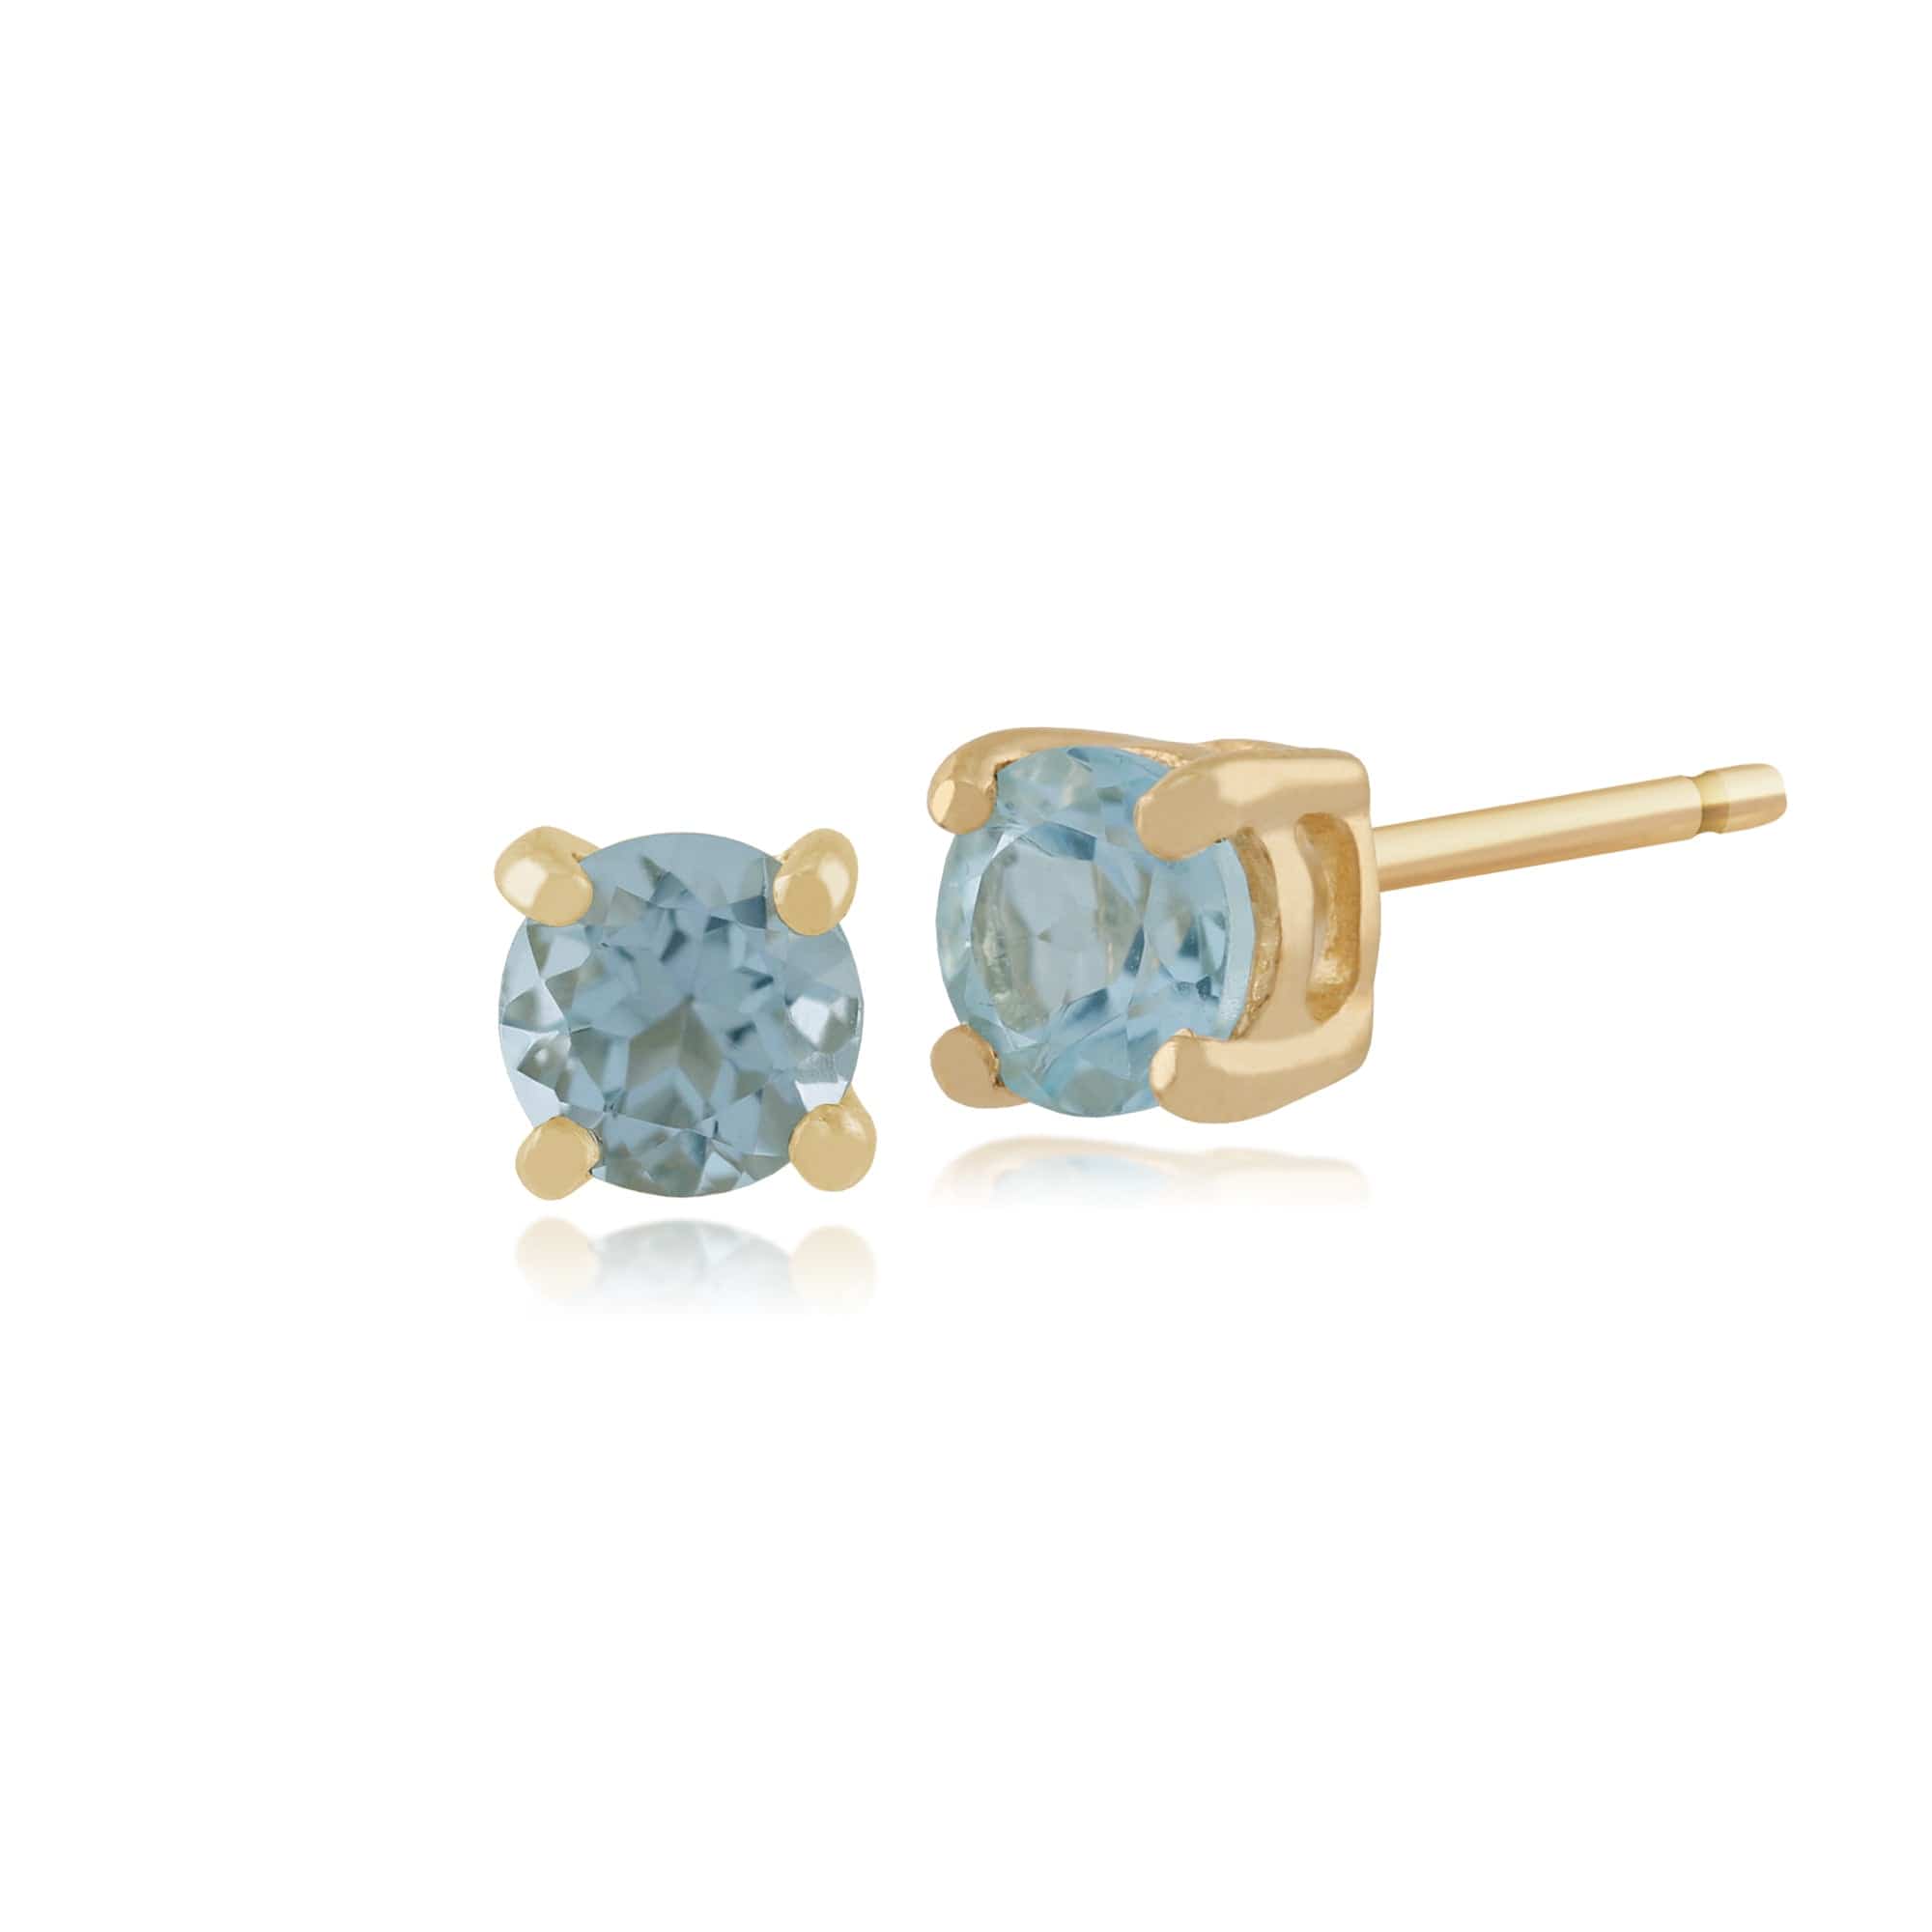 Classic Round Blue Topaz Stud Earrings with Detachable Diamond Square Earrings Jacket Set in 9ct Yellow Gold - Gemondo